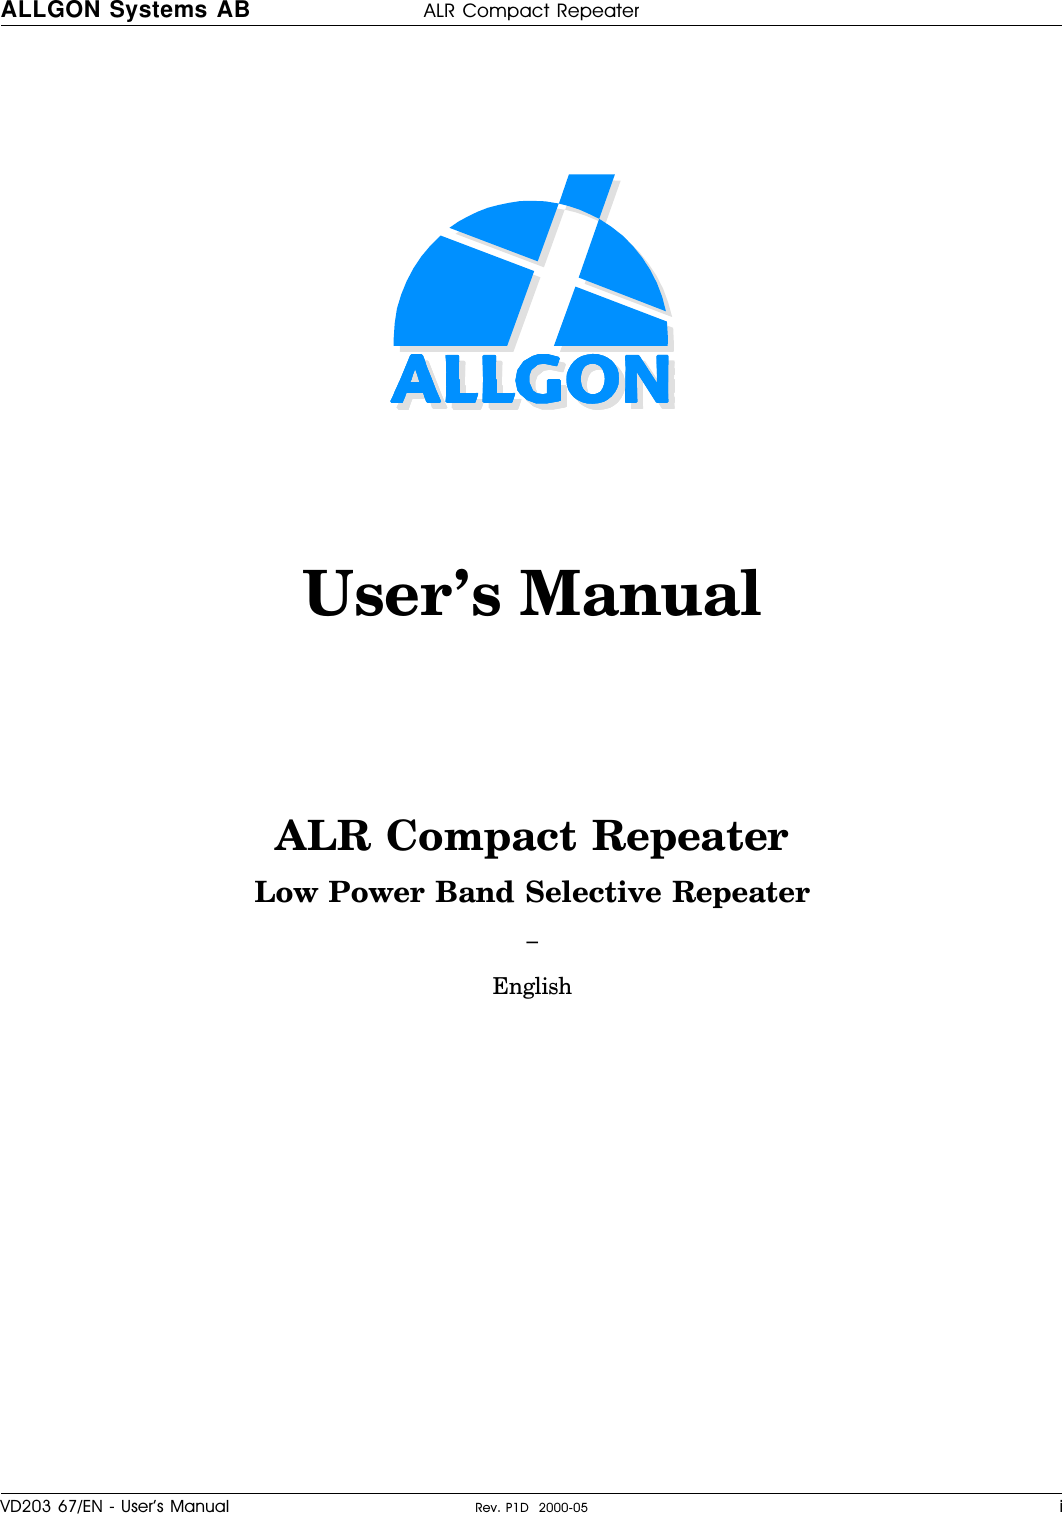 User’s ManualALR Compact RepeaterLow Power Band Selective Repeater–EnglishALLGON Systems AB ALR Compact RepeaterVD203 67/EN - User’s Manual Rev. P1D  2000-05 i